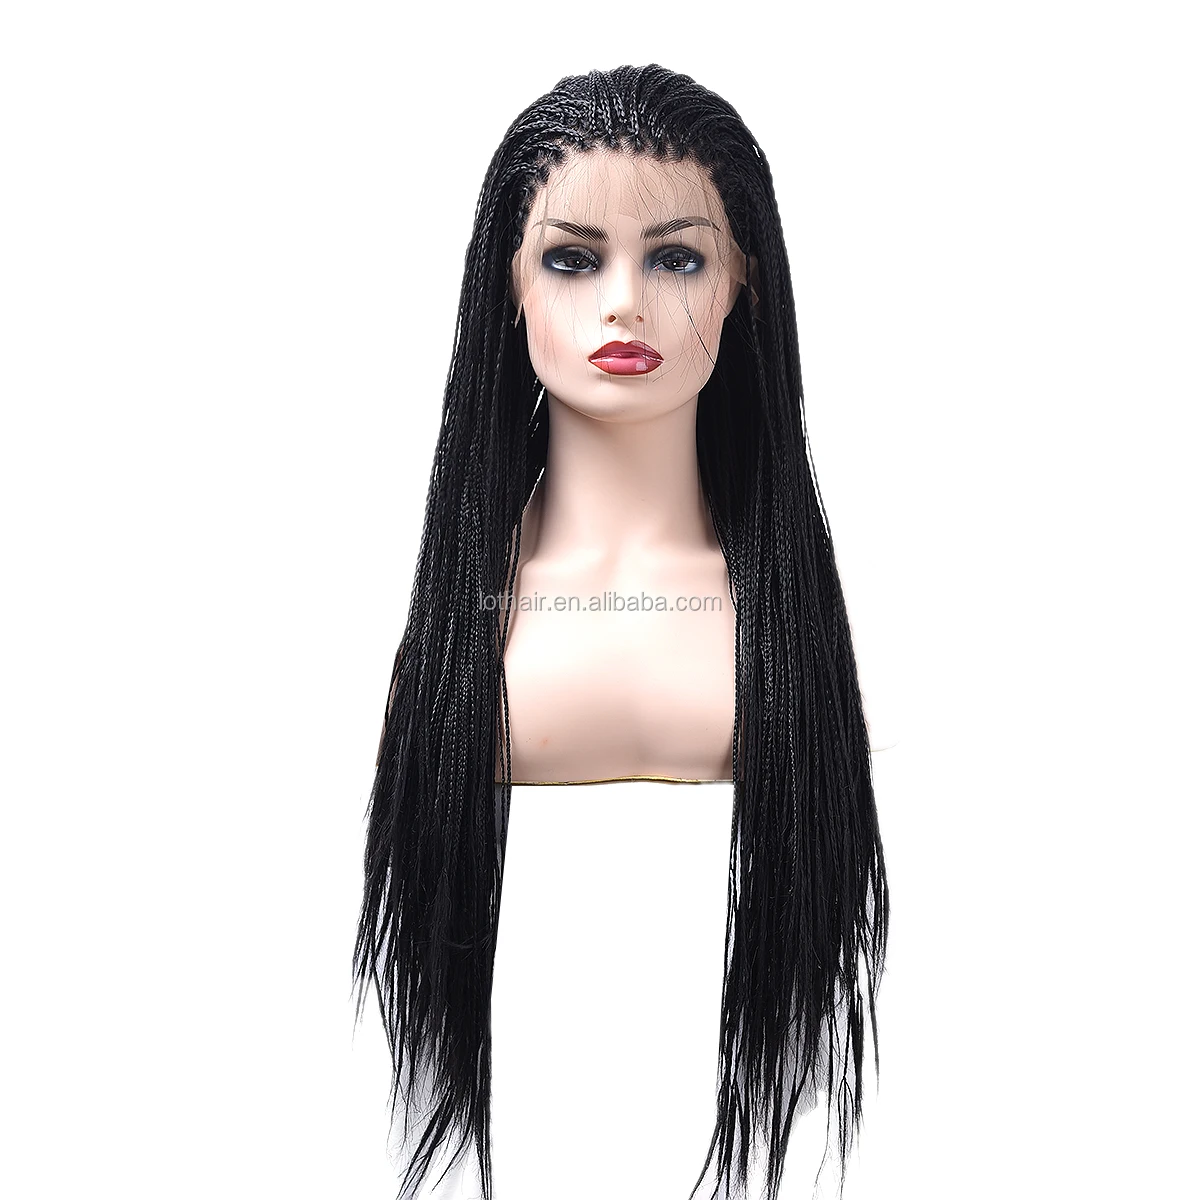 Wholesale cheap high quality braided wigs for black women lace front wig in stock